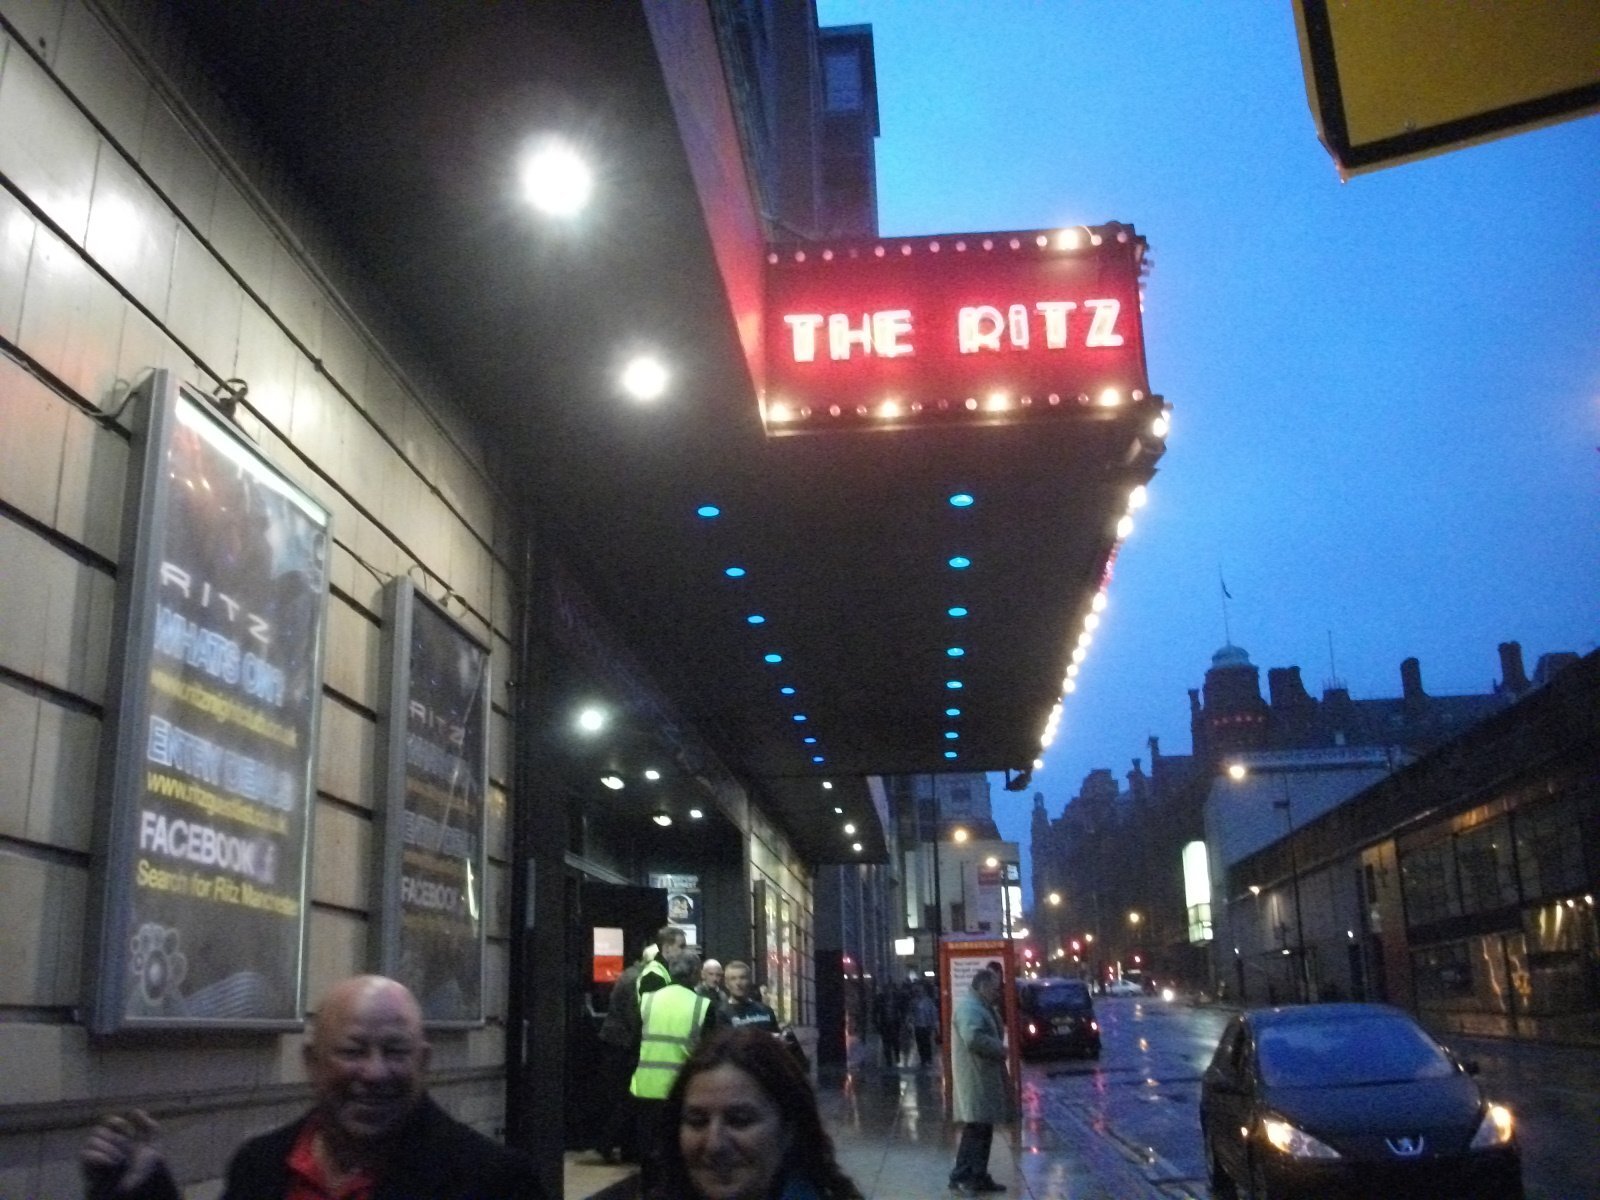 Manchester Sunday at the Ritz